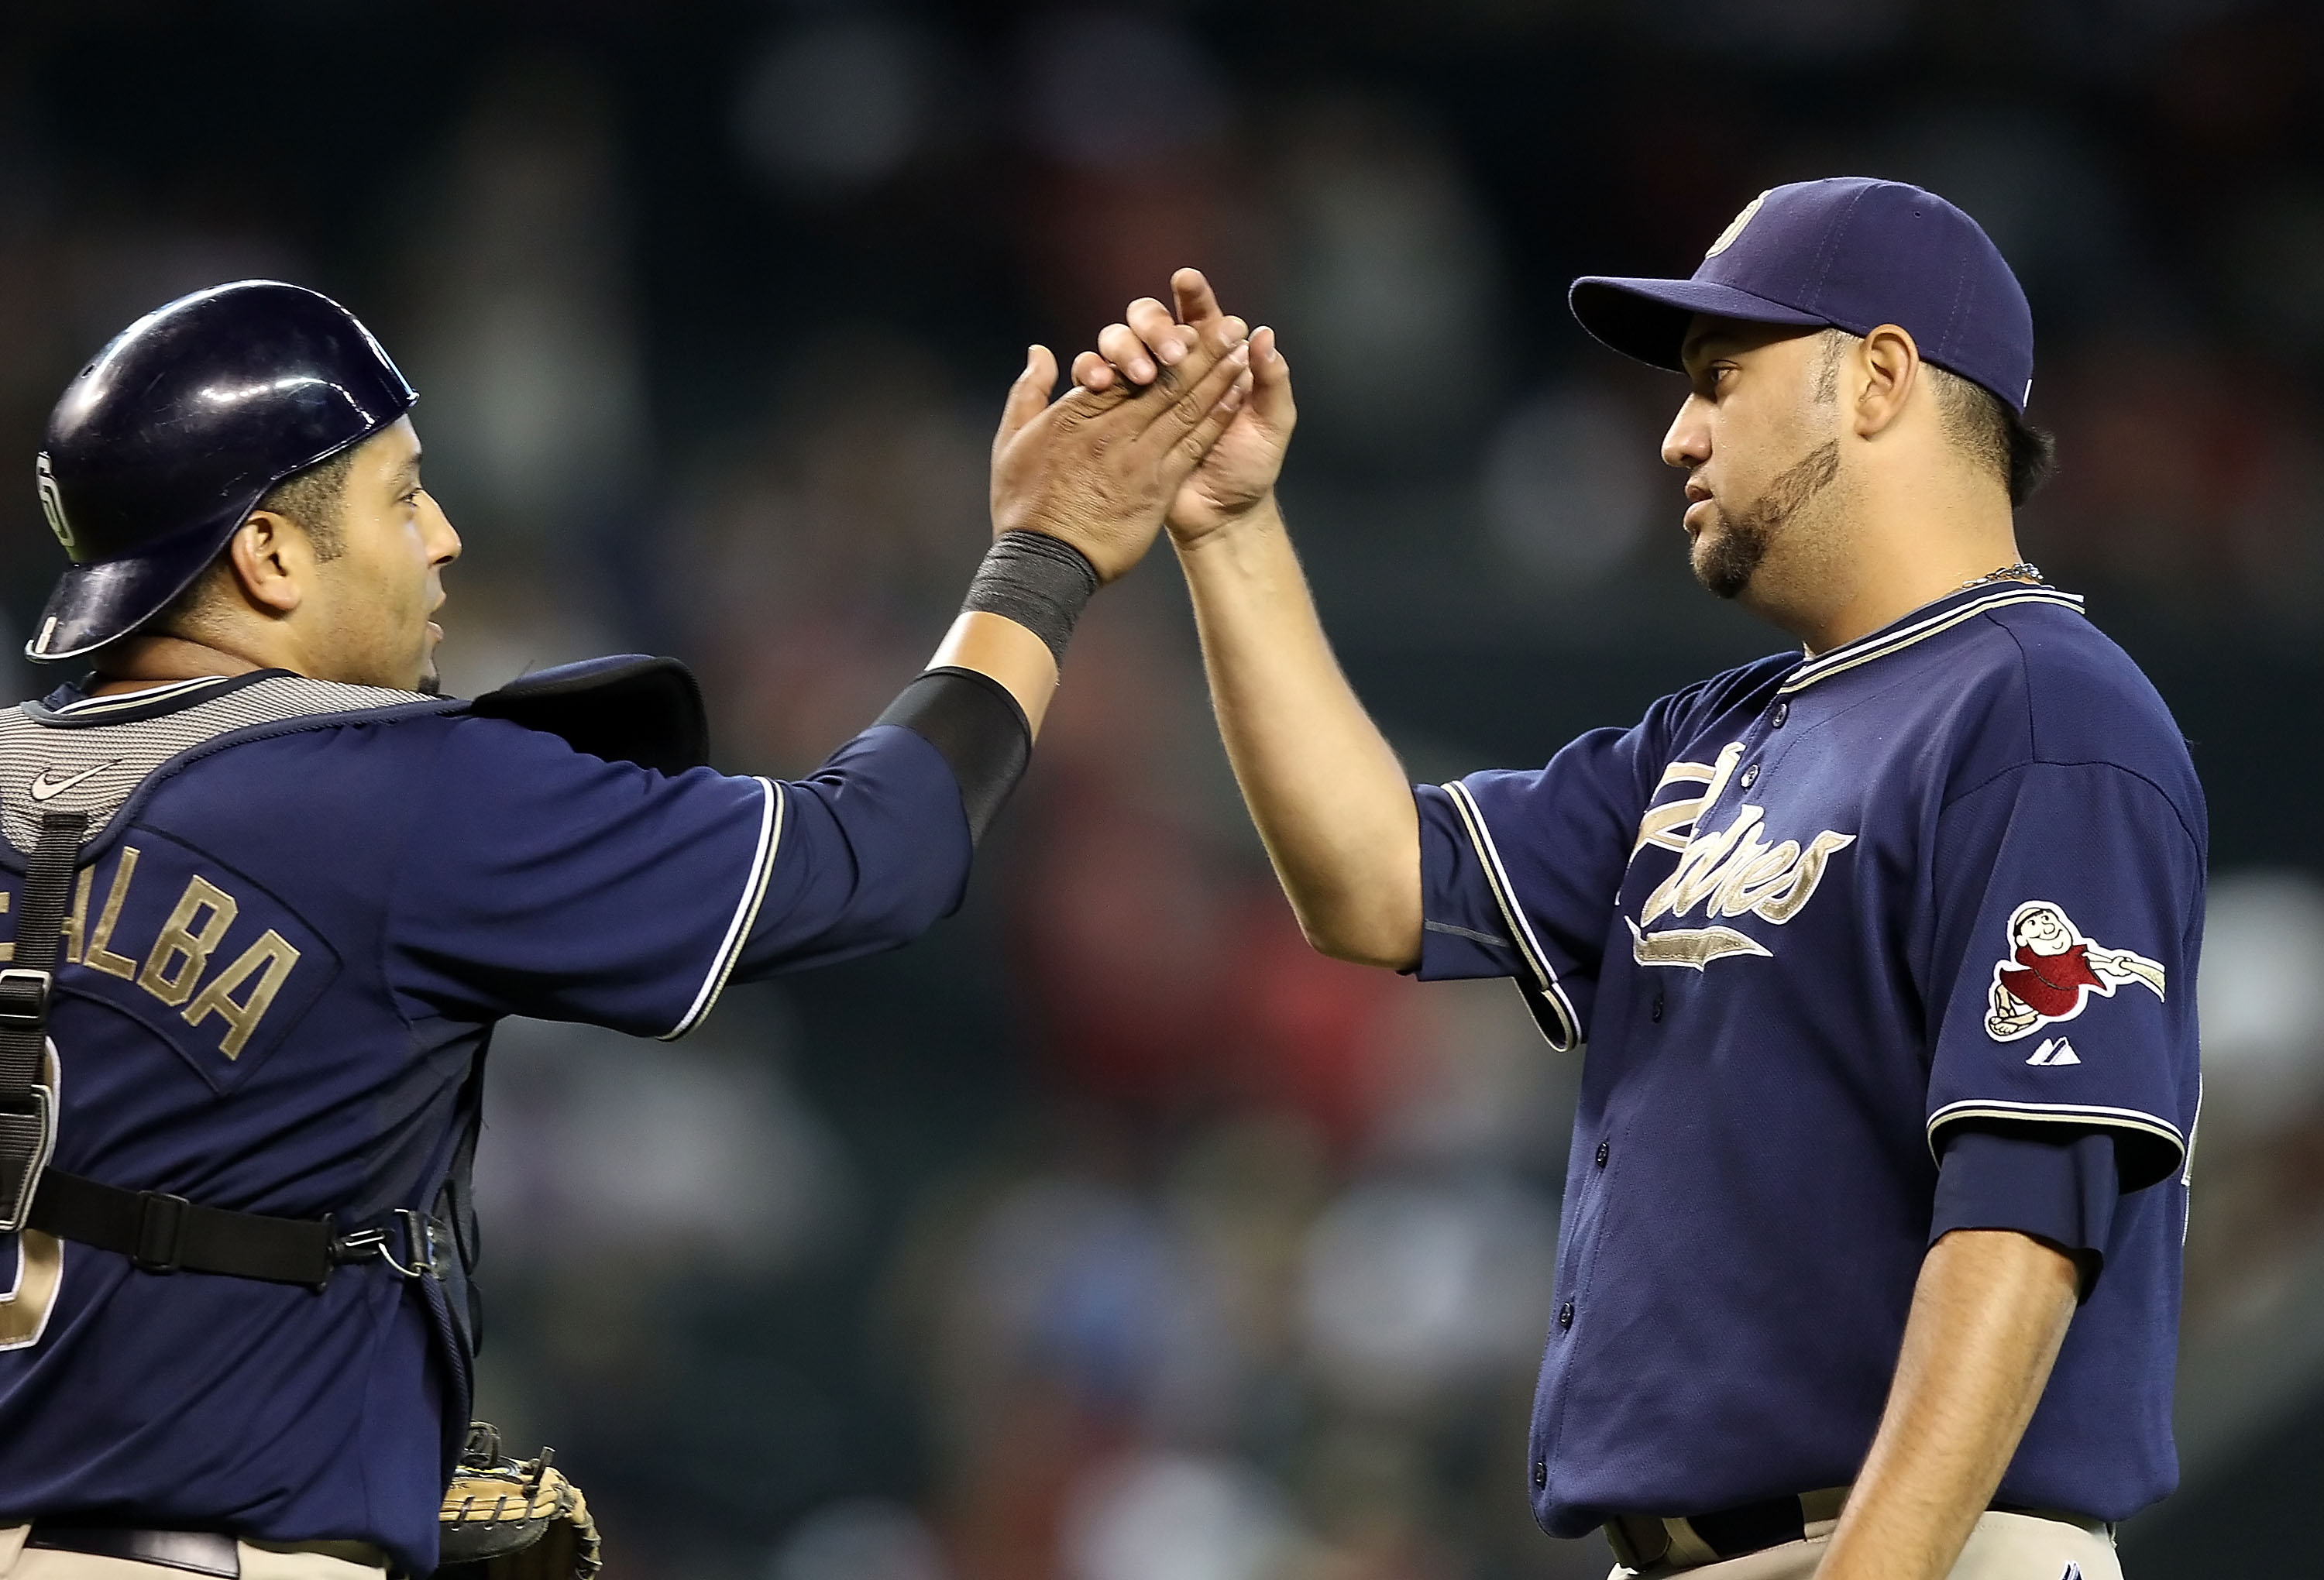 PHOENIX - AUGUST 08:  Relief pitcher Edward Mujica #45 of the San Diego Padres high fives catcher Yorvit Torrealba #8 after defeating the Arizona Diamondbacks in the Major League Baseball game at Chase Field on August 8, 2010 in Phoenix, Arizona.  The Pad